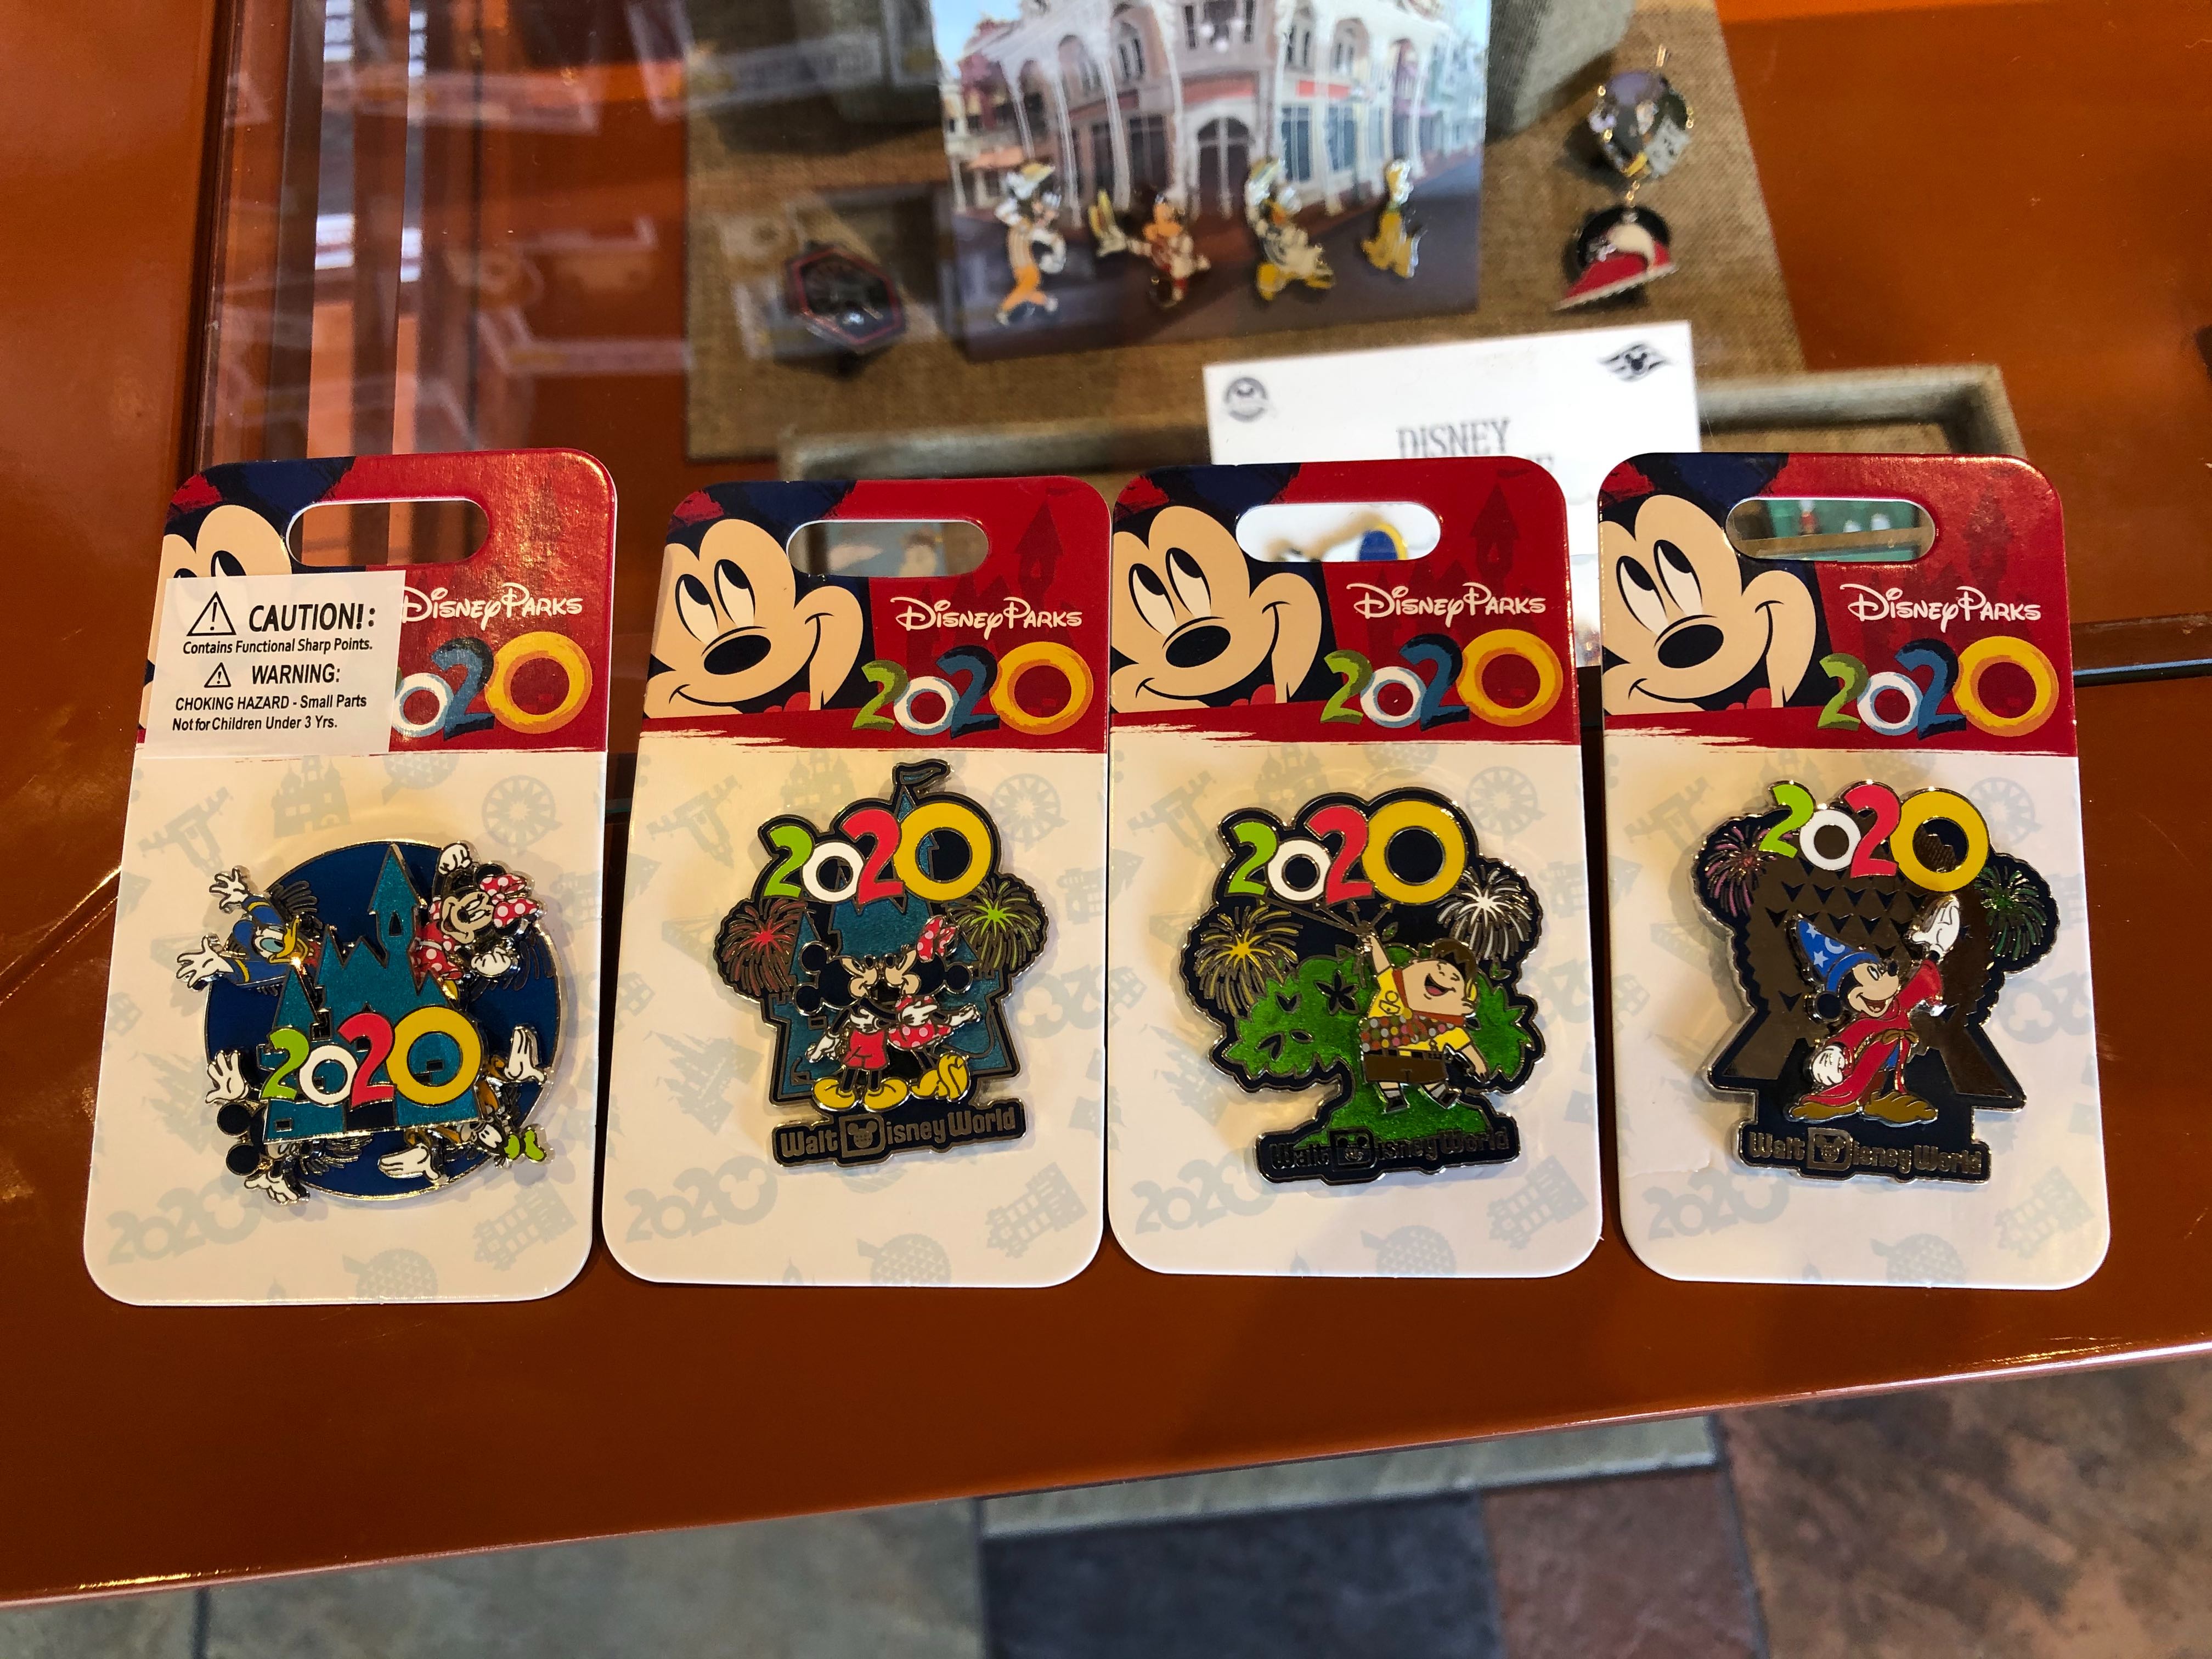 PHOTOS: New Park Specific 2020 Logo Trading Pins Debut at Walt Disney World - WDW News Today